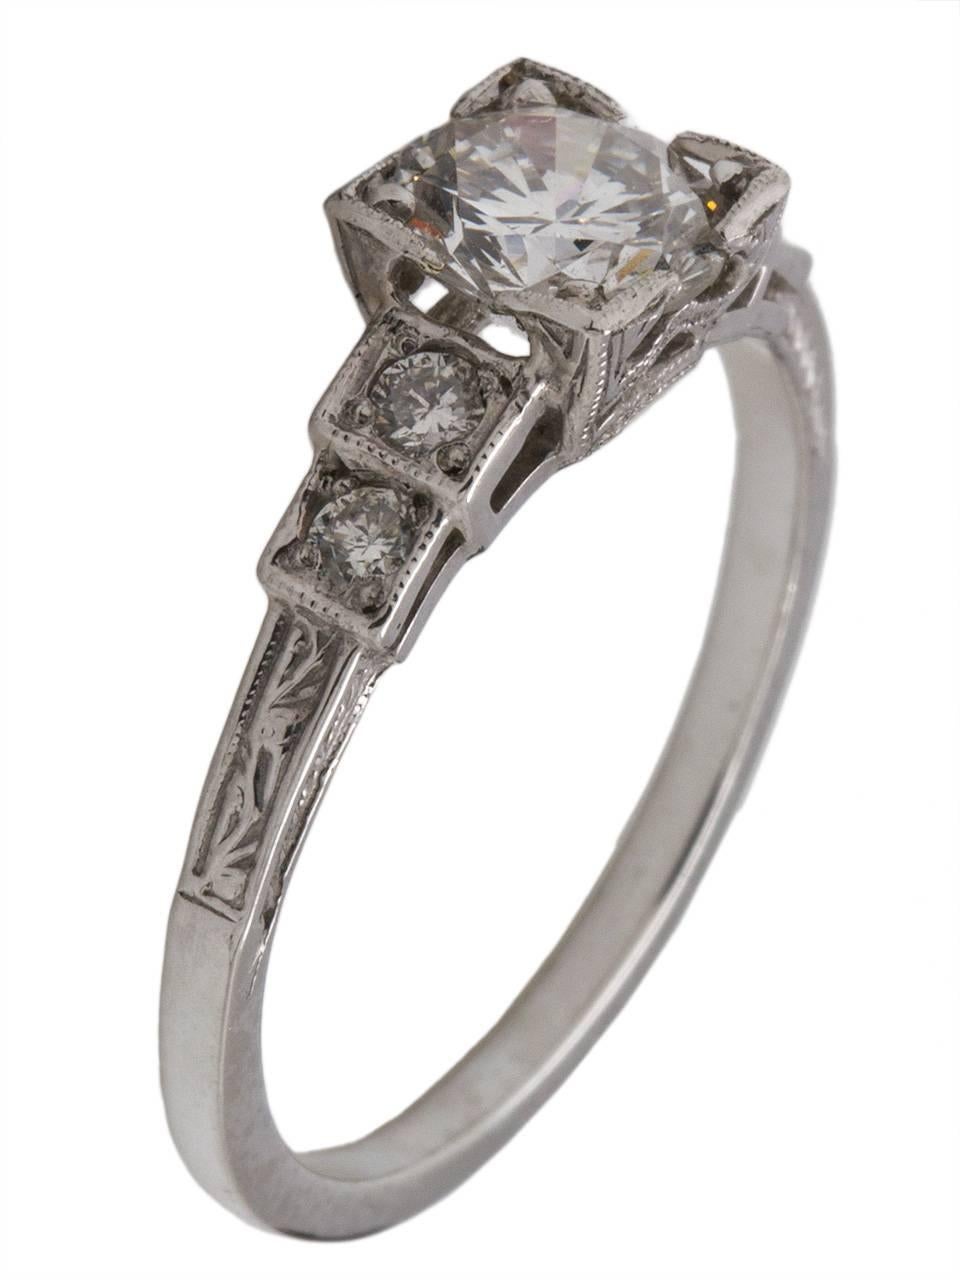 Gorgeous vintage style Art Deco platinum engagement ring reminiscent of the 1930s, featuring an EGL certified 0.85 carat round brilliant cut center diamond, D-SI1. Four bead set round side diamonds set in a stair-step design are the perfect accent